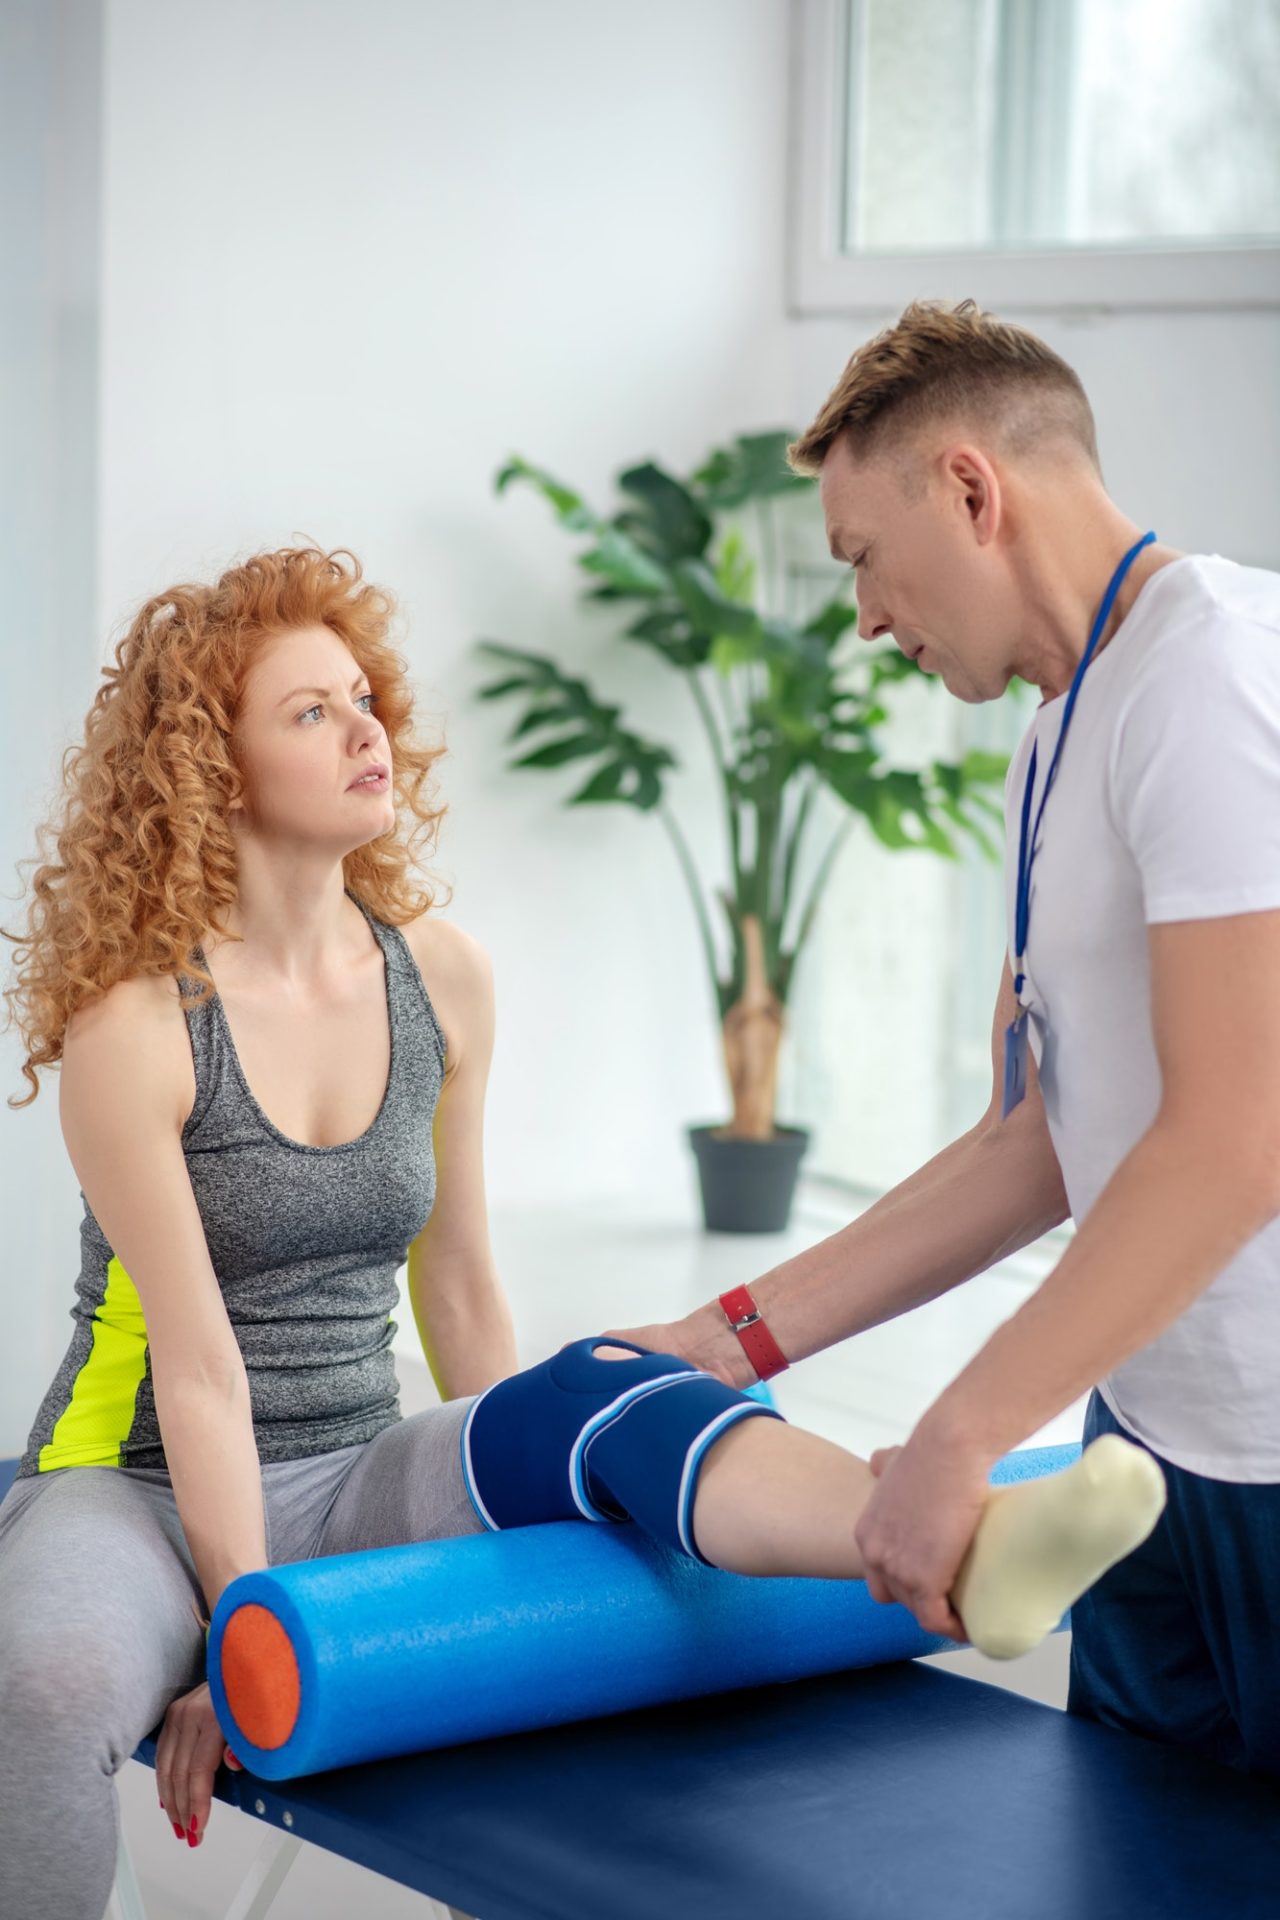 Male physiotherapist examining knee bandage of female patient sitting with knee bolster